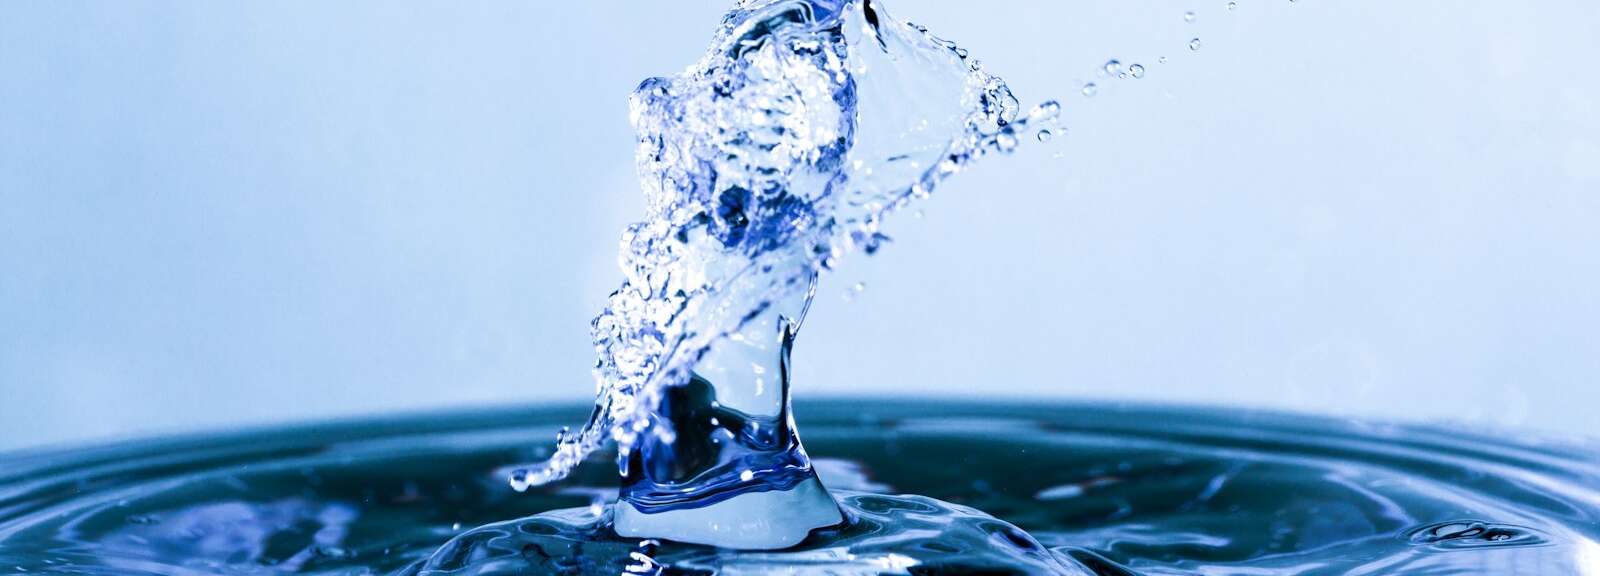 Water splash in close up photography.